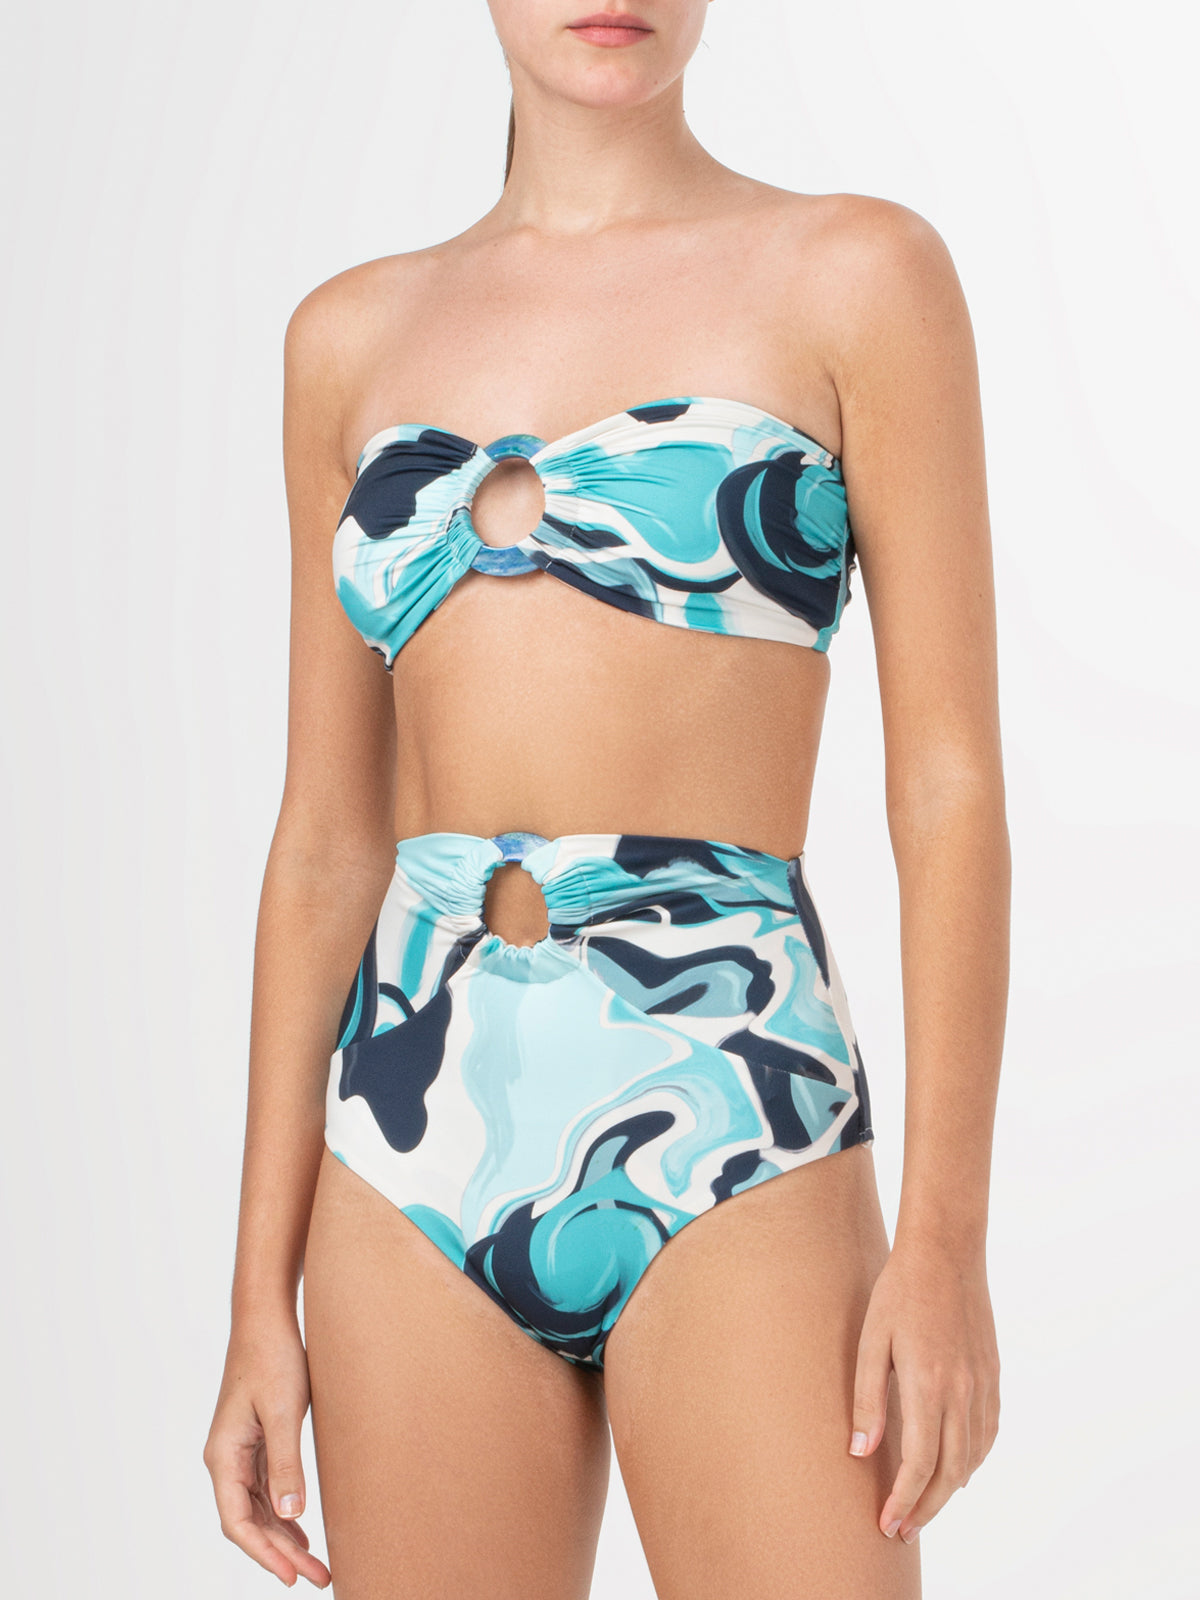 A Garlenda Top + Lecco Bikini Turquoise Marble with an abstract print and resin ring detail in blue and white.